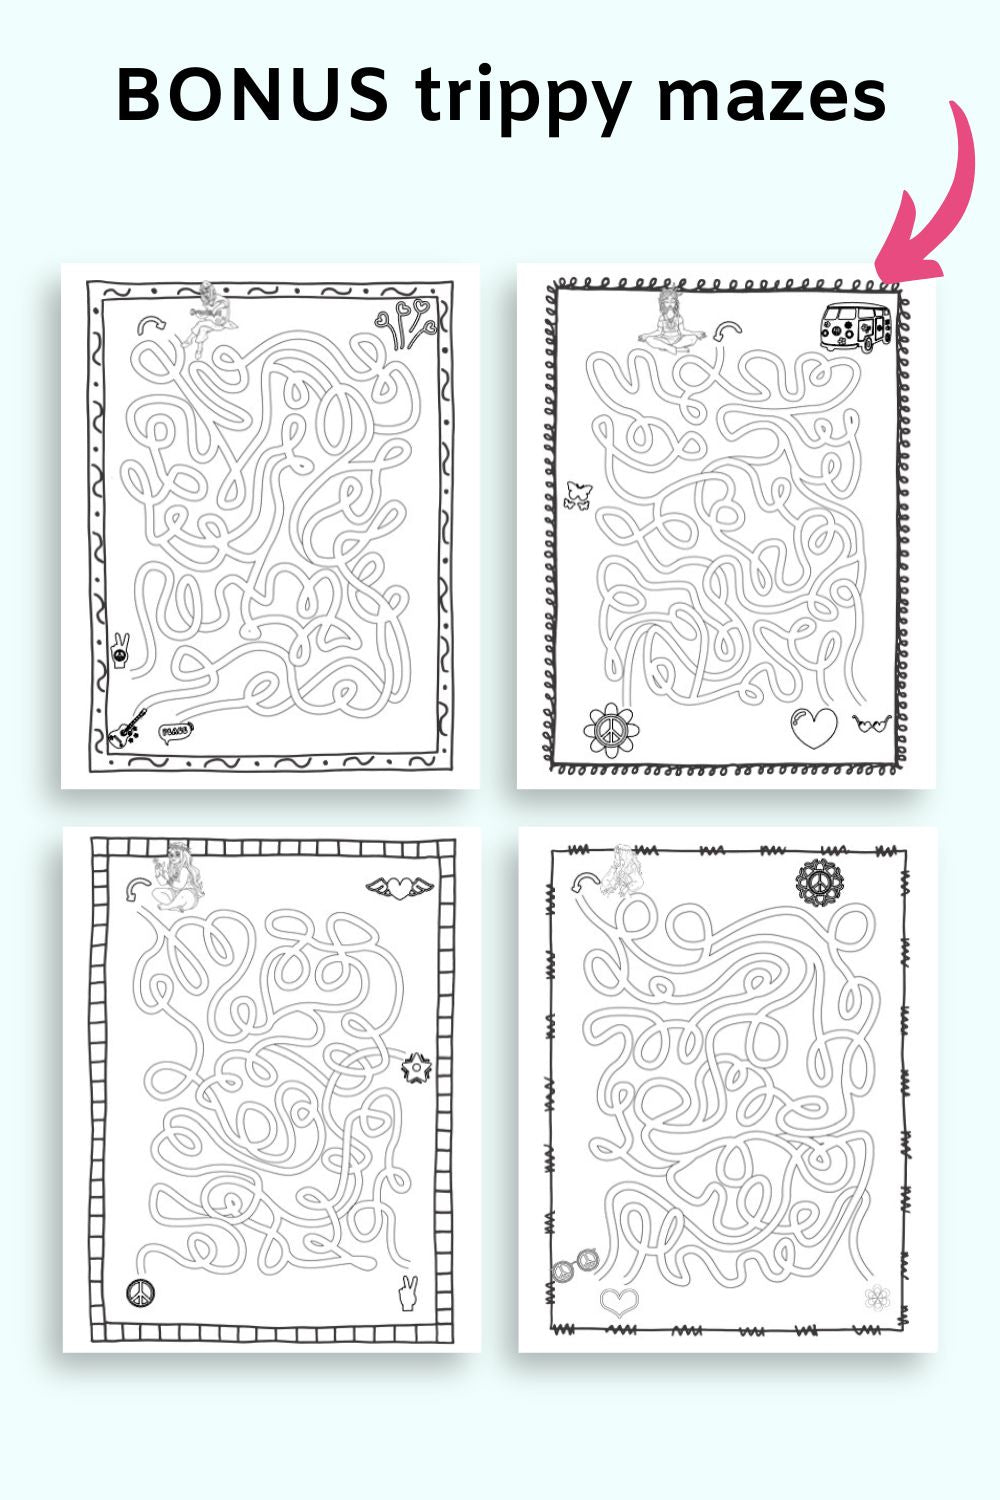 Text "bonus trippy mazes" with an arrow pointing at four page with hand drawn mazes